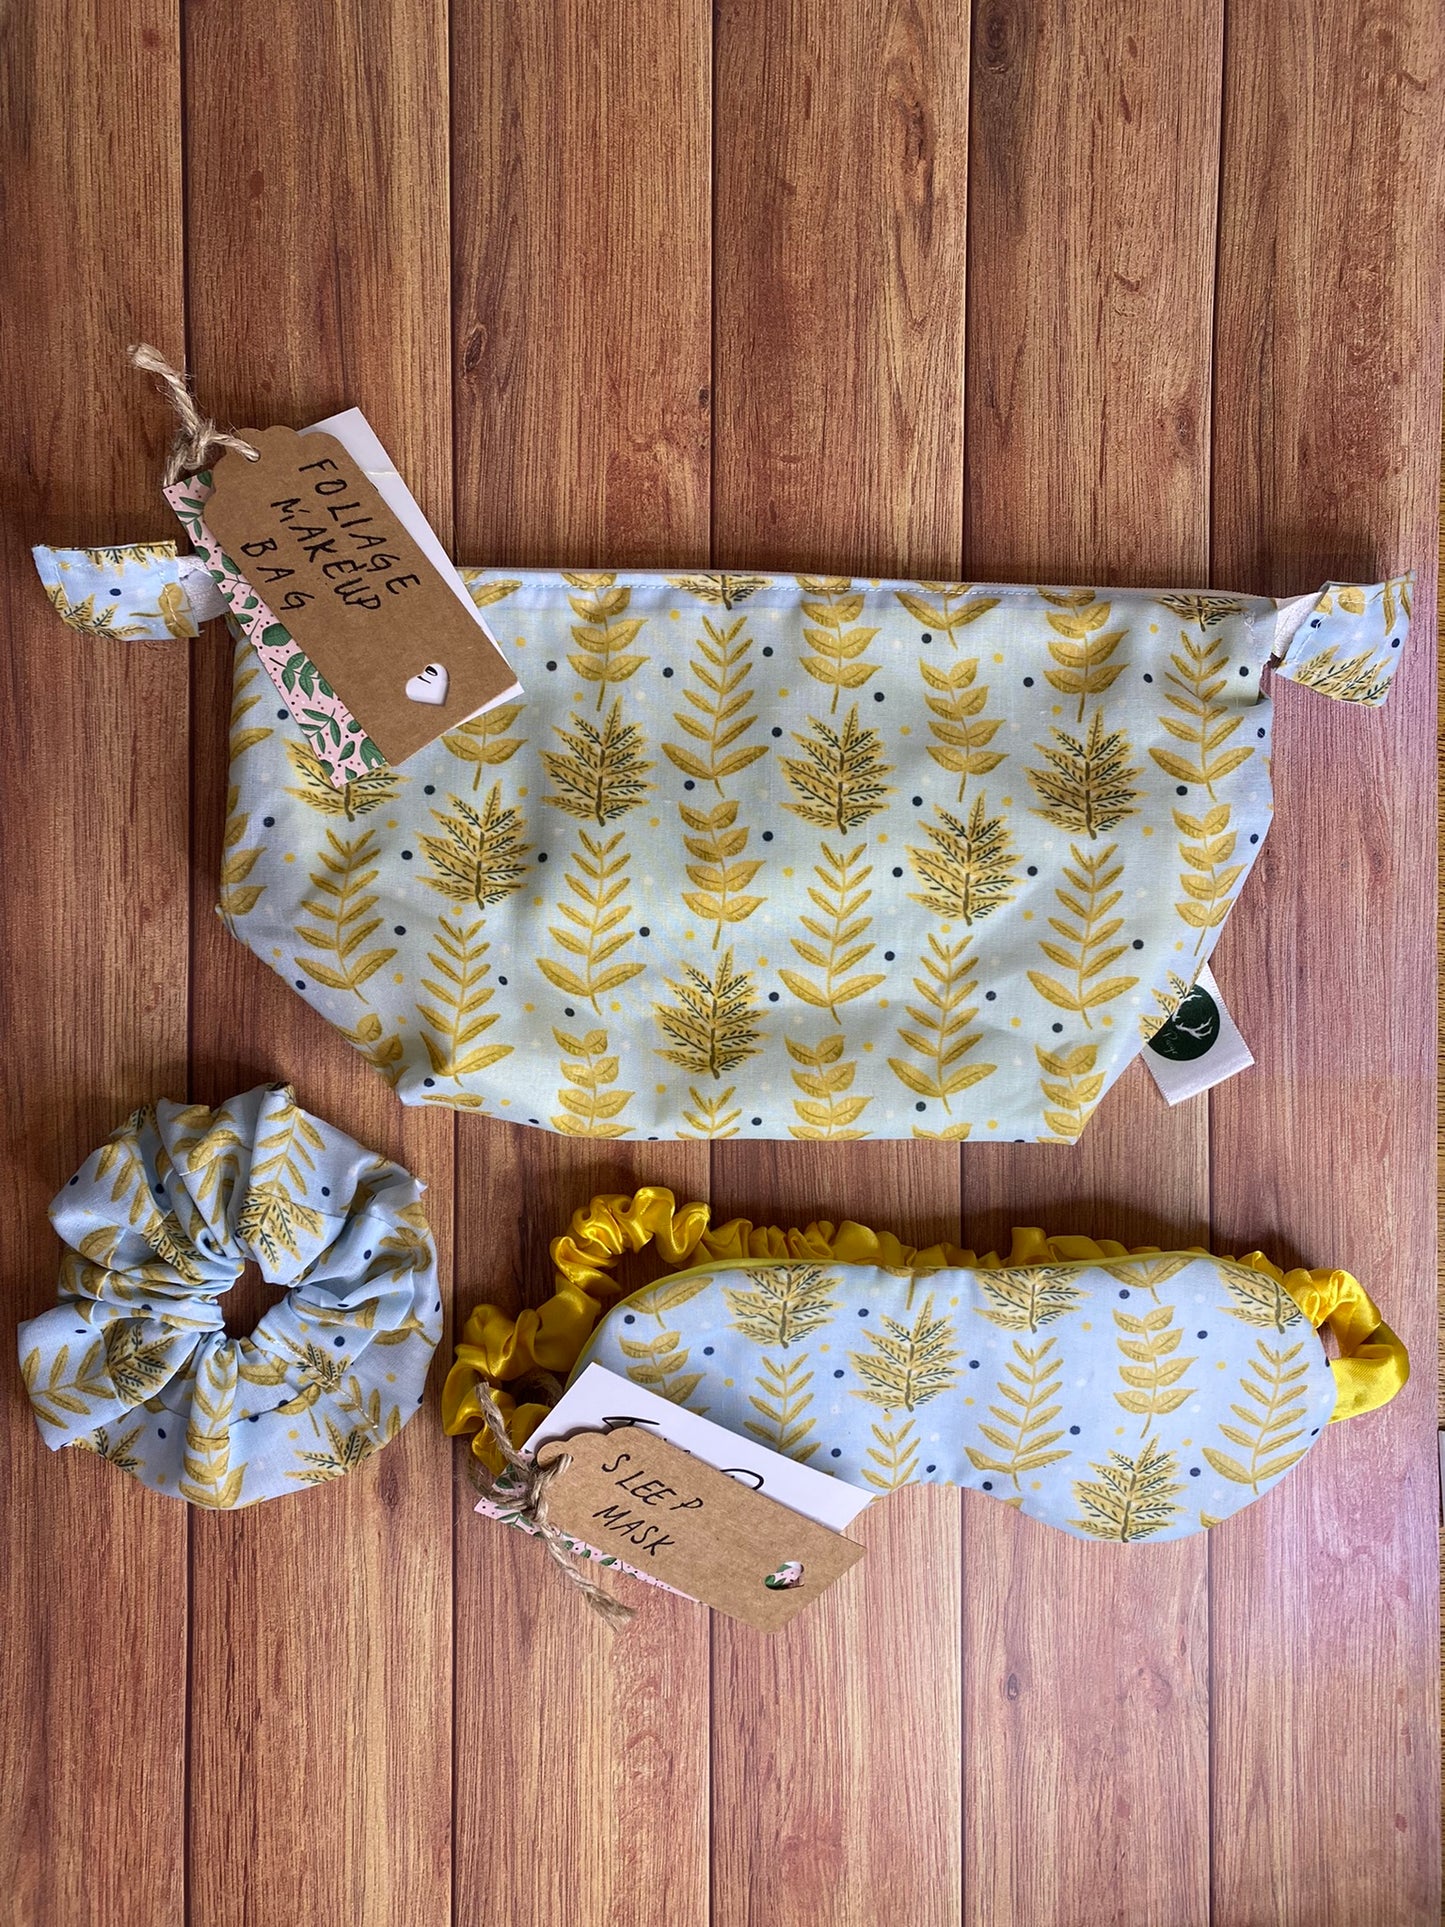 yellow foliage patterned makeup bag and sleepmask and scrunchie giftset on wood surface